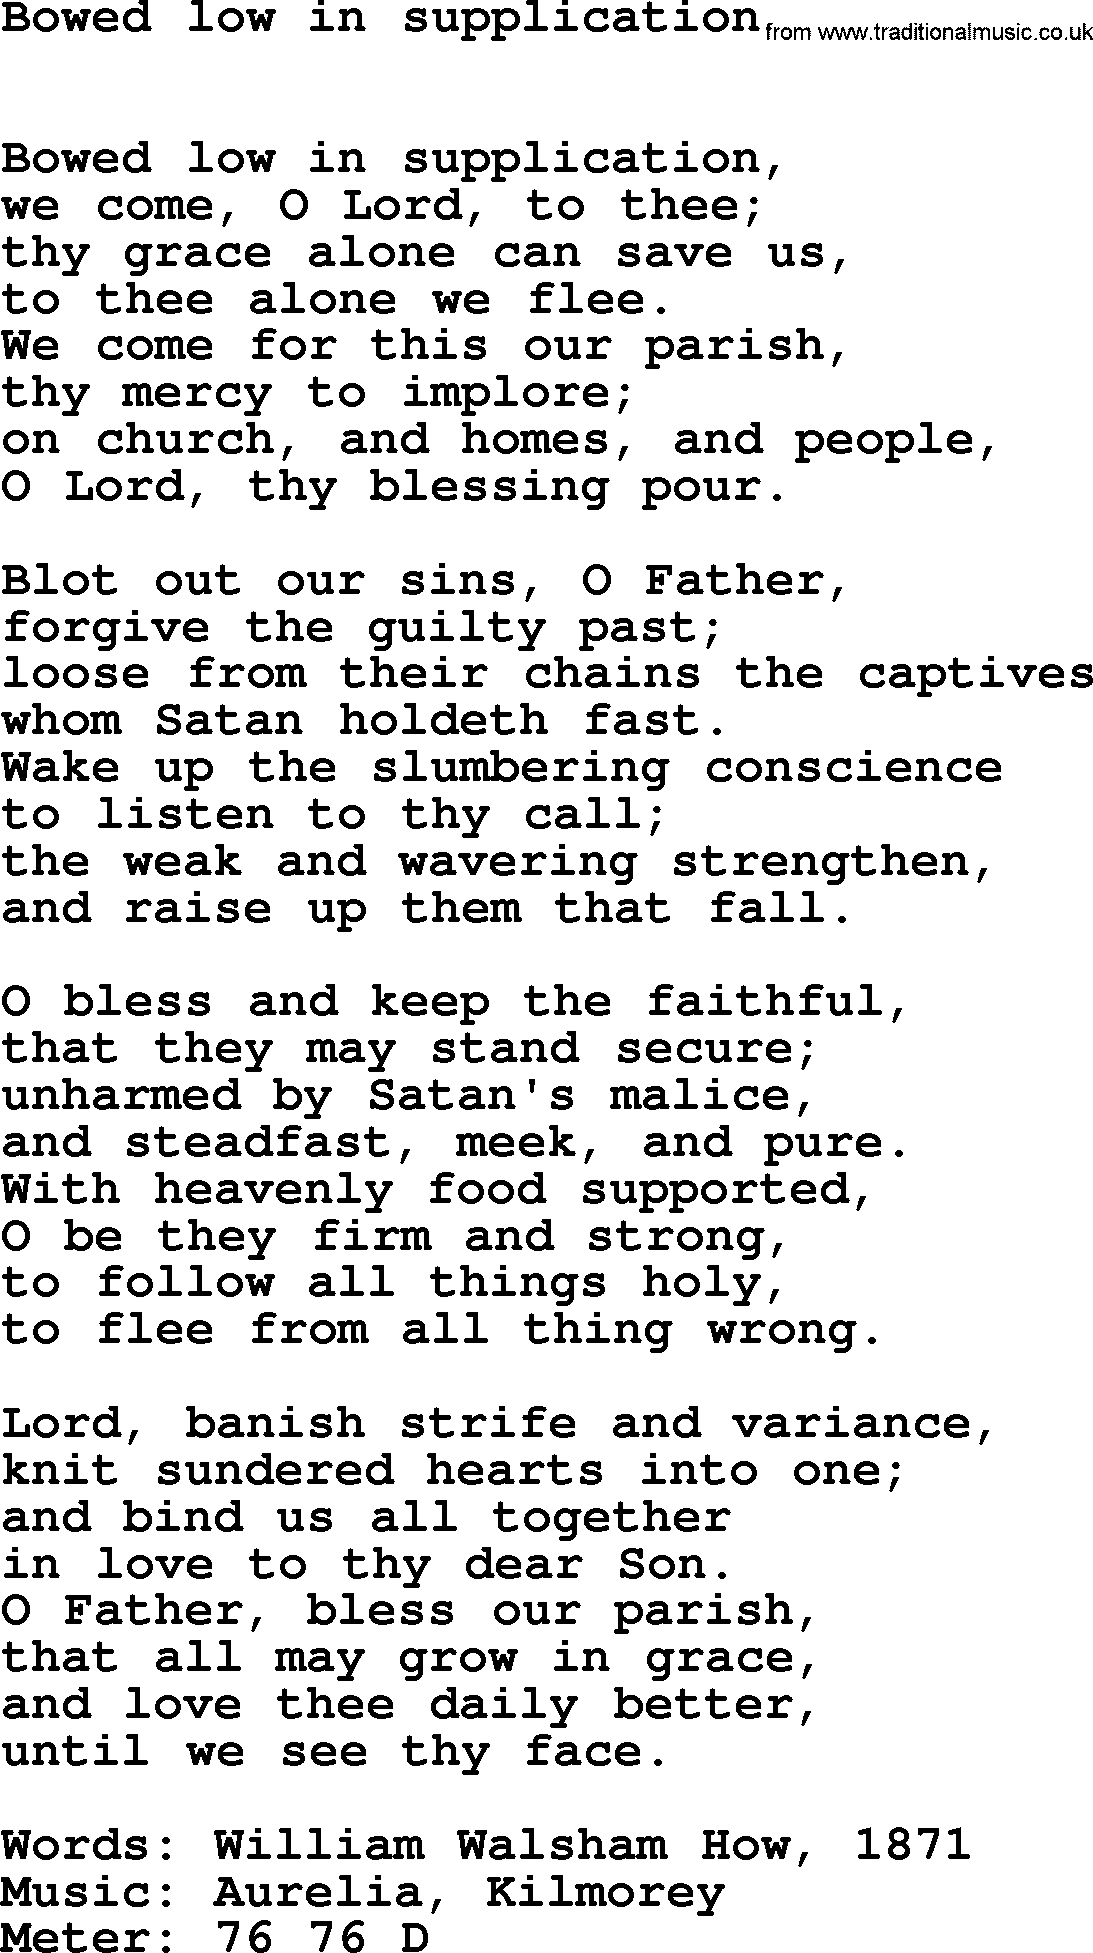 Book of Common Praise Hymn: Bowed Low In Supplication.txt lyrics with midi music